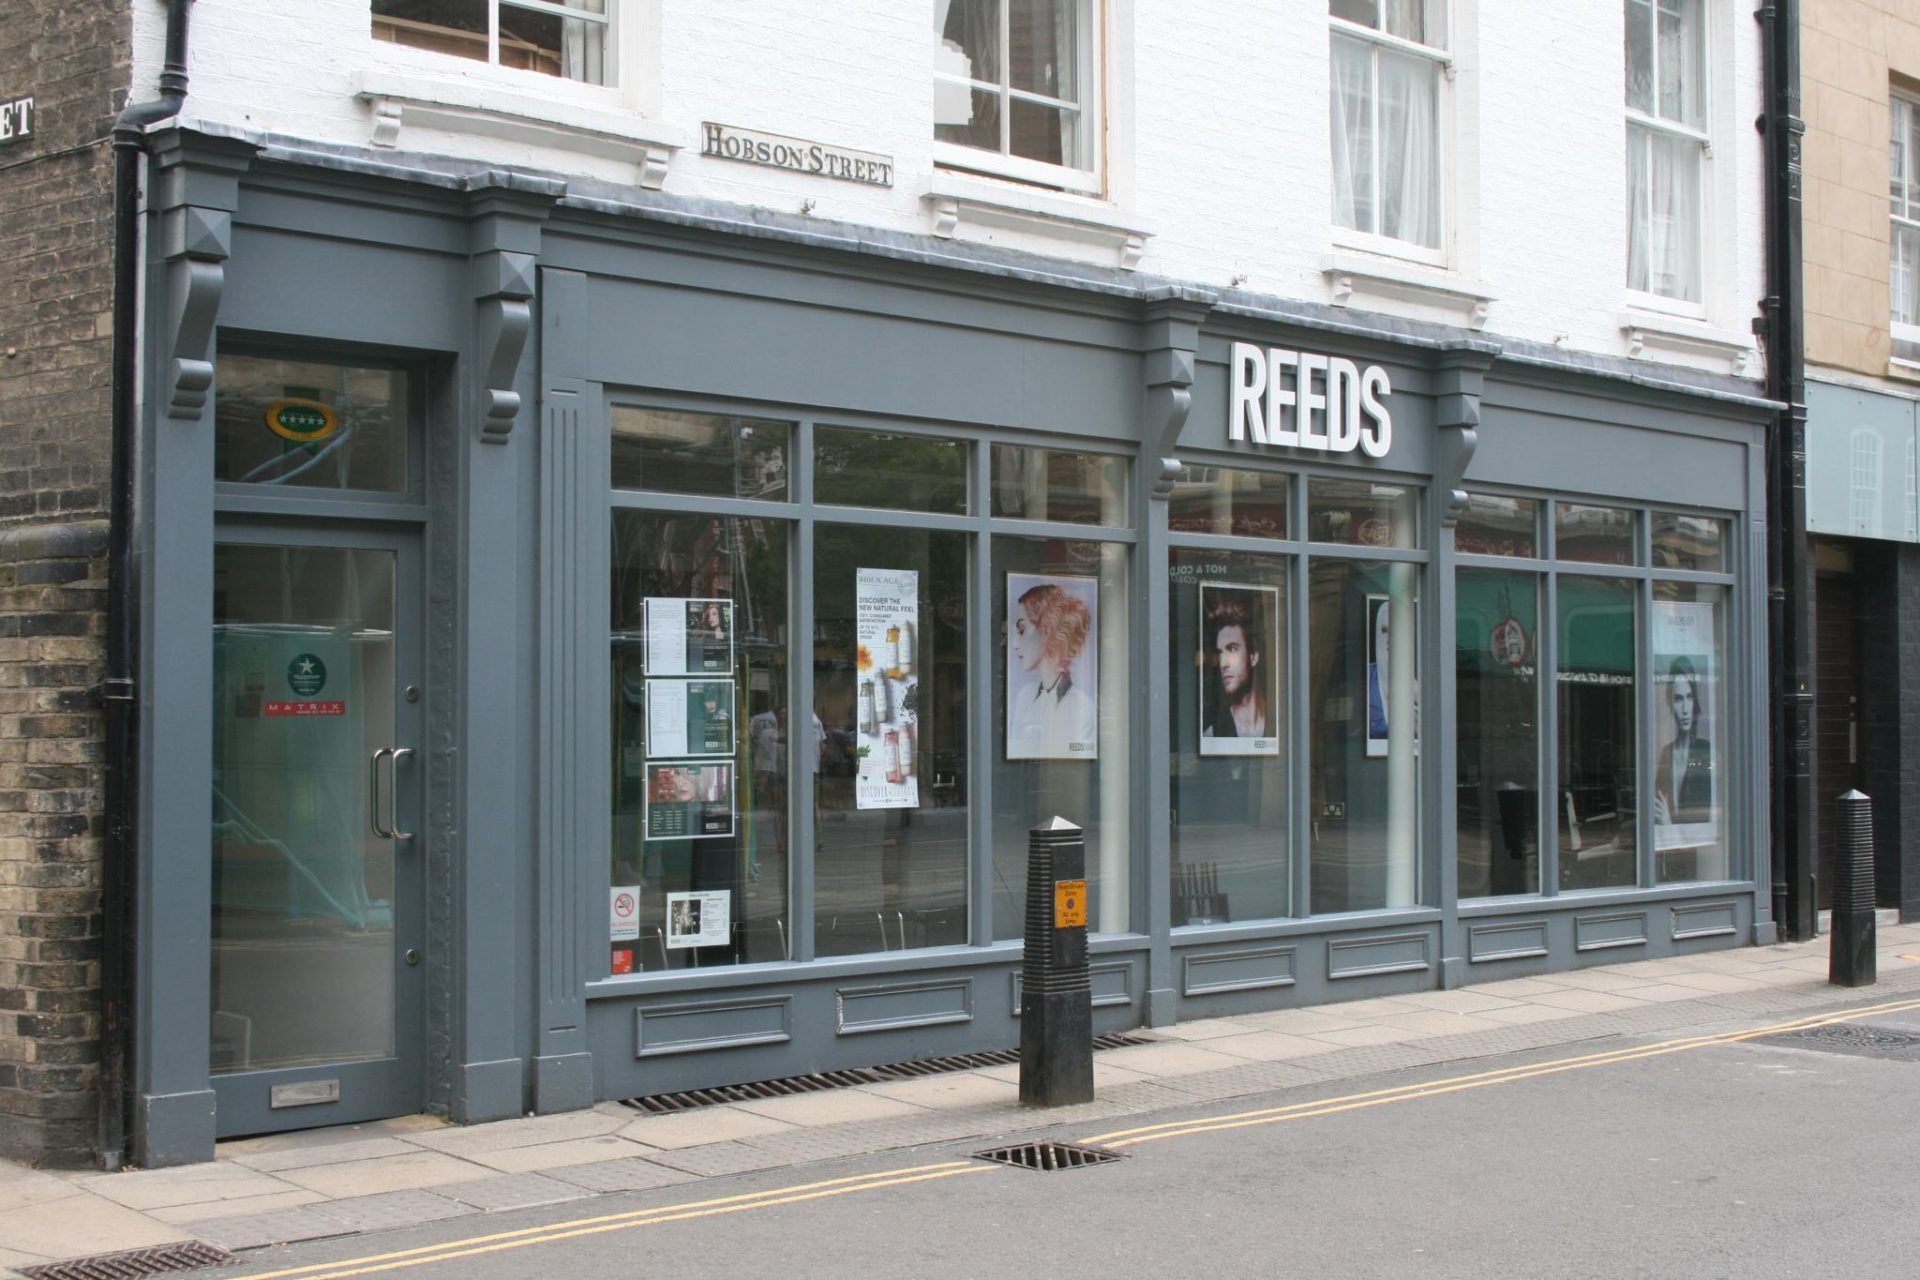 Top Hairdressers in Cambridge at REEDS Hair